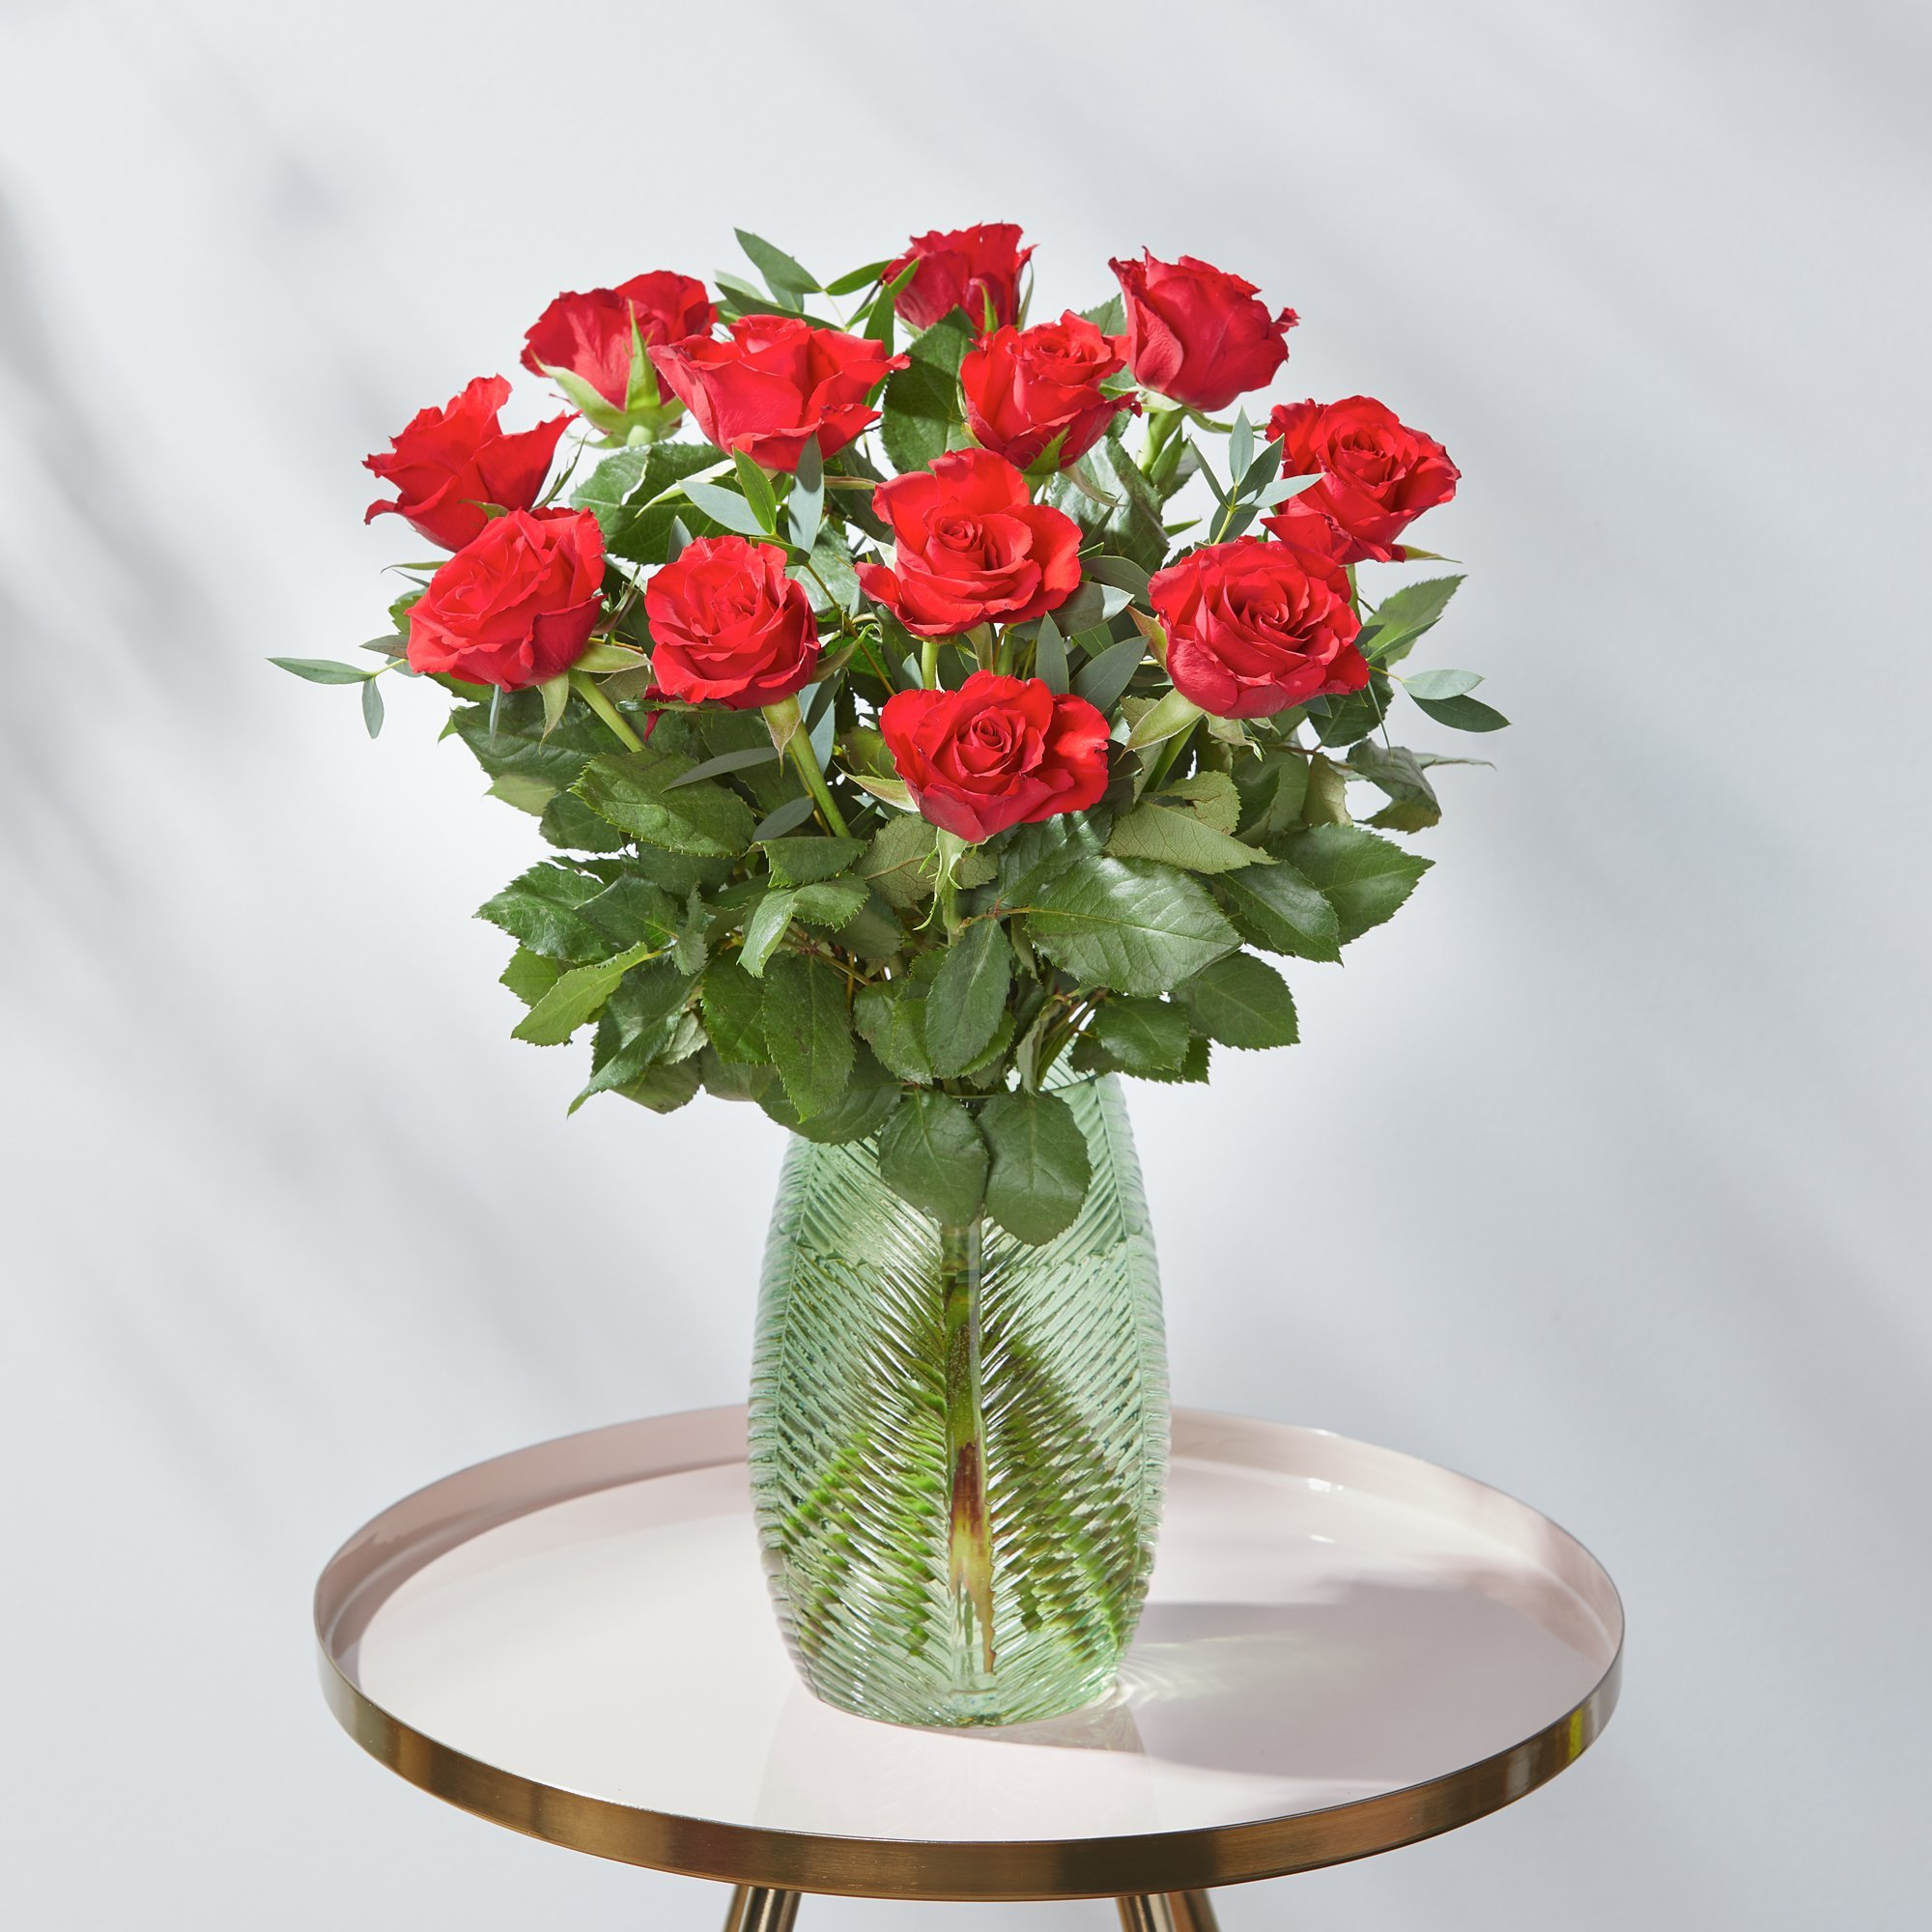 Red Roses image